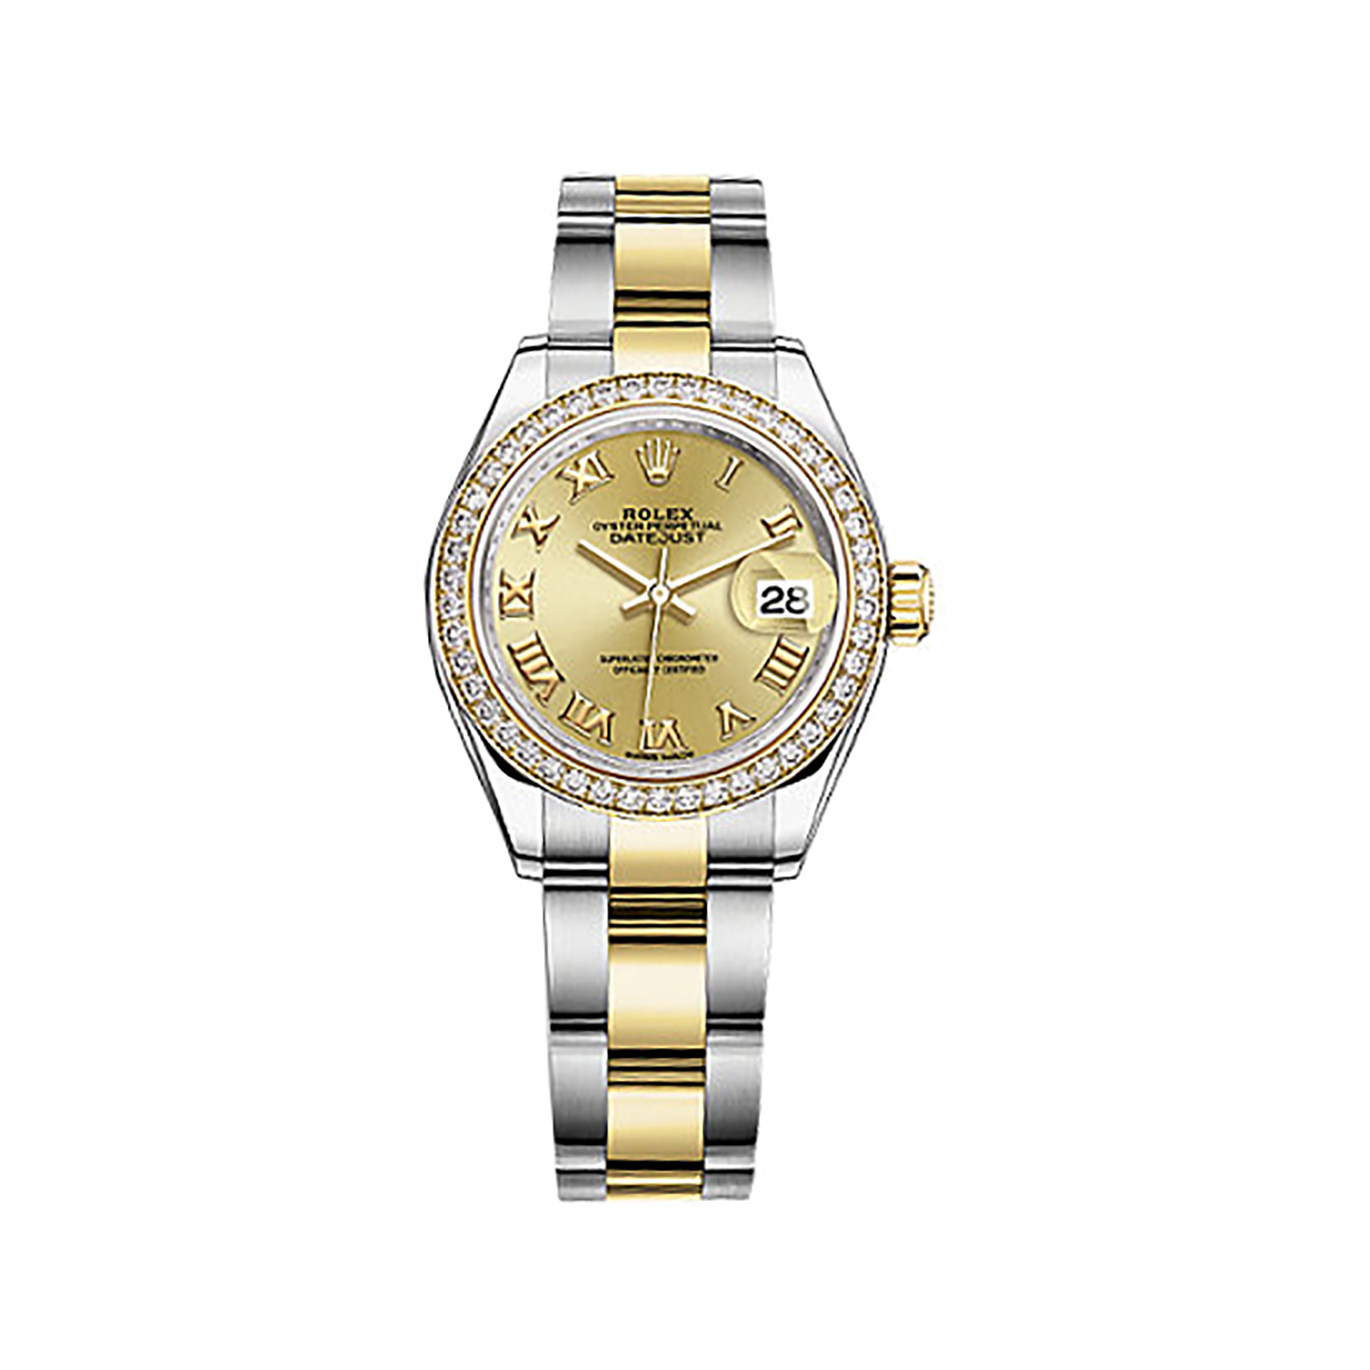 Lady-Datejust 28 279383RBR Gold & Stainless Steel & Diamonds Watch (Champagne)